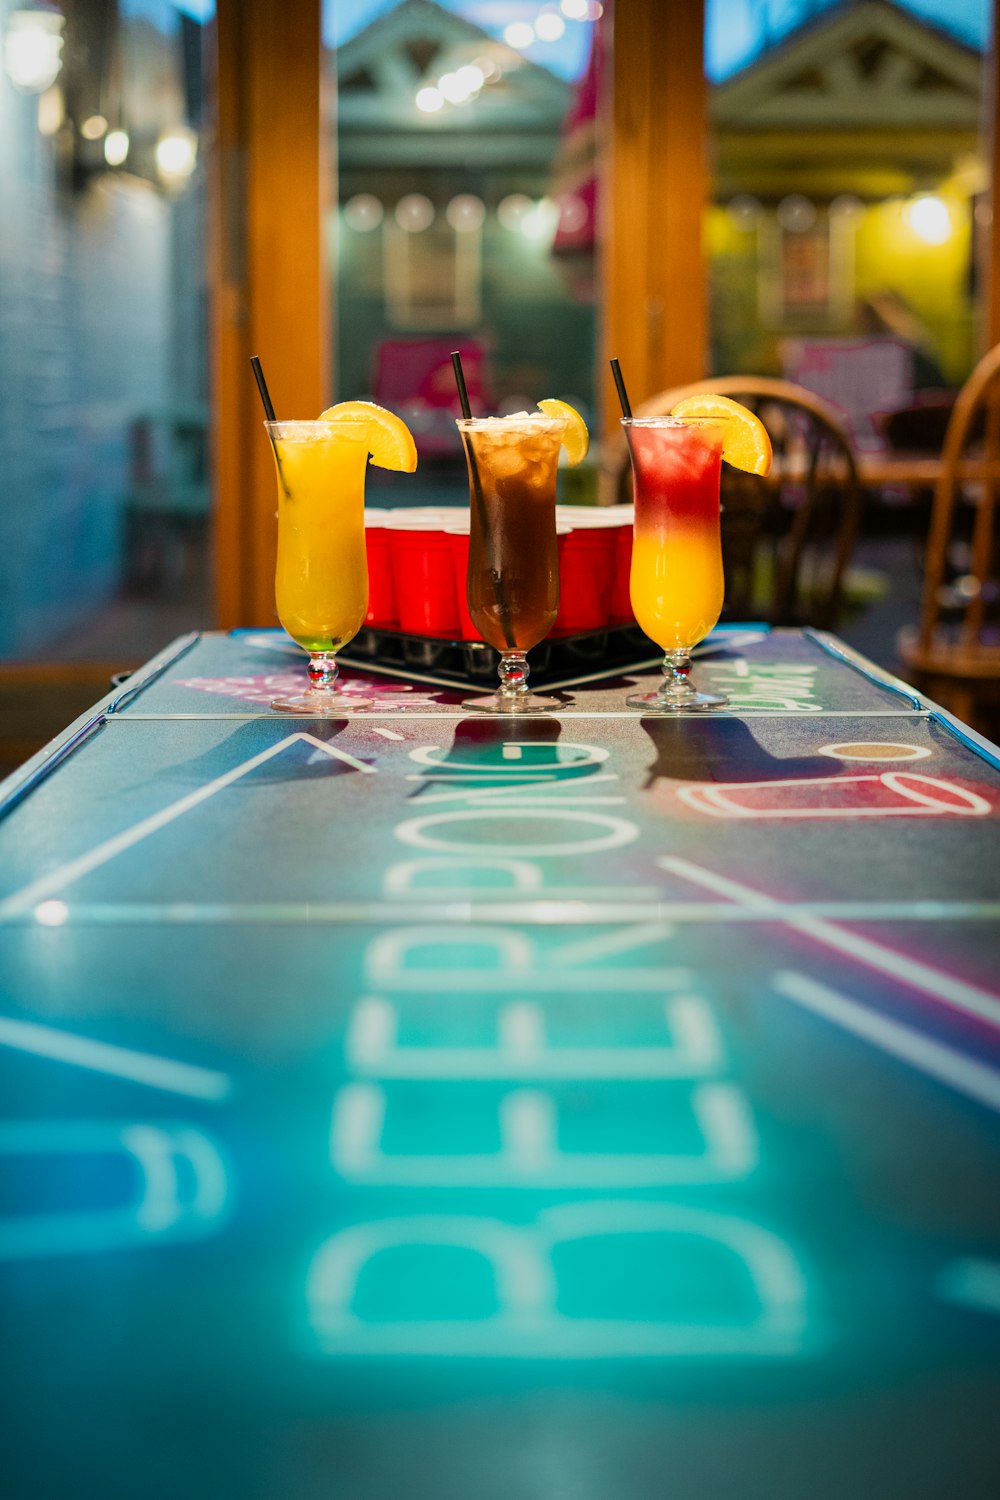 a close up of a table with drinks on it